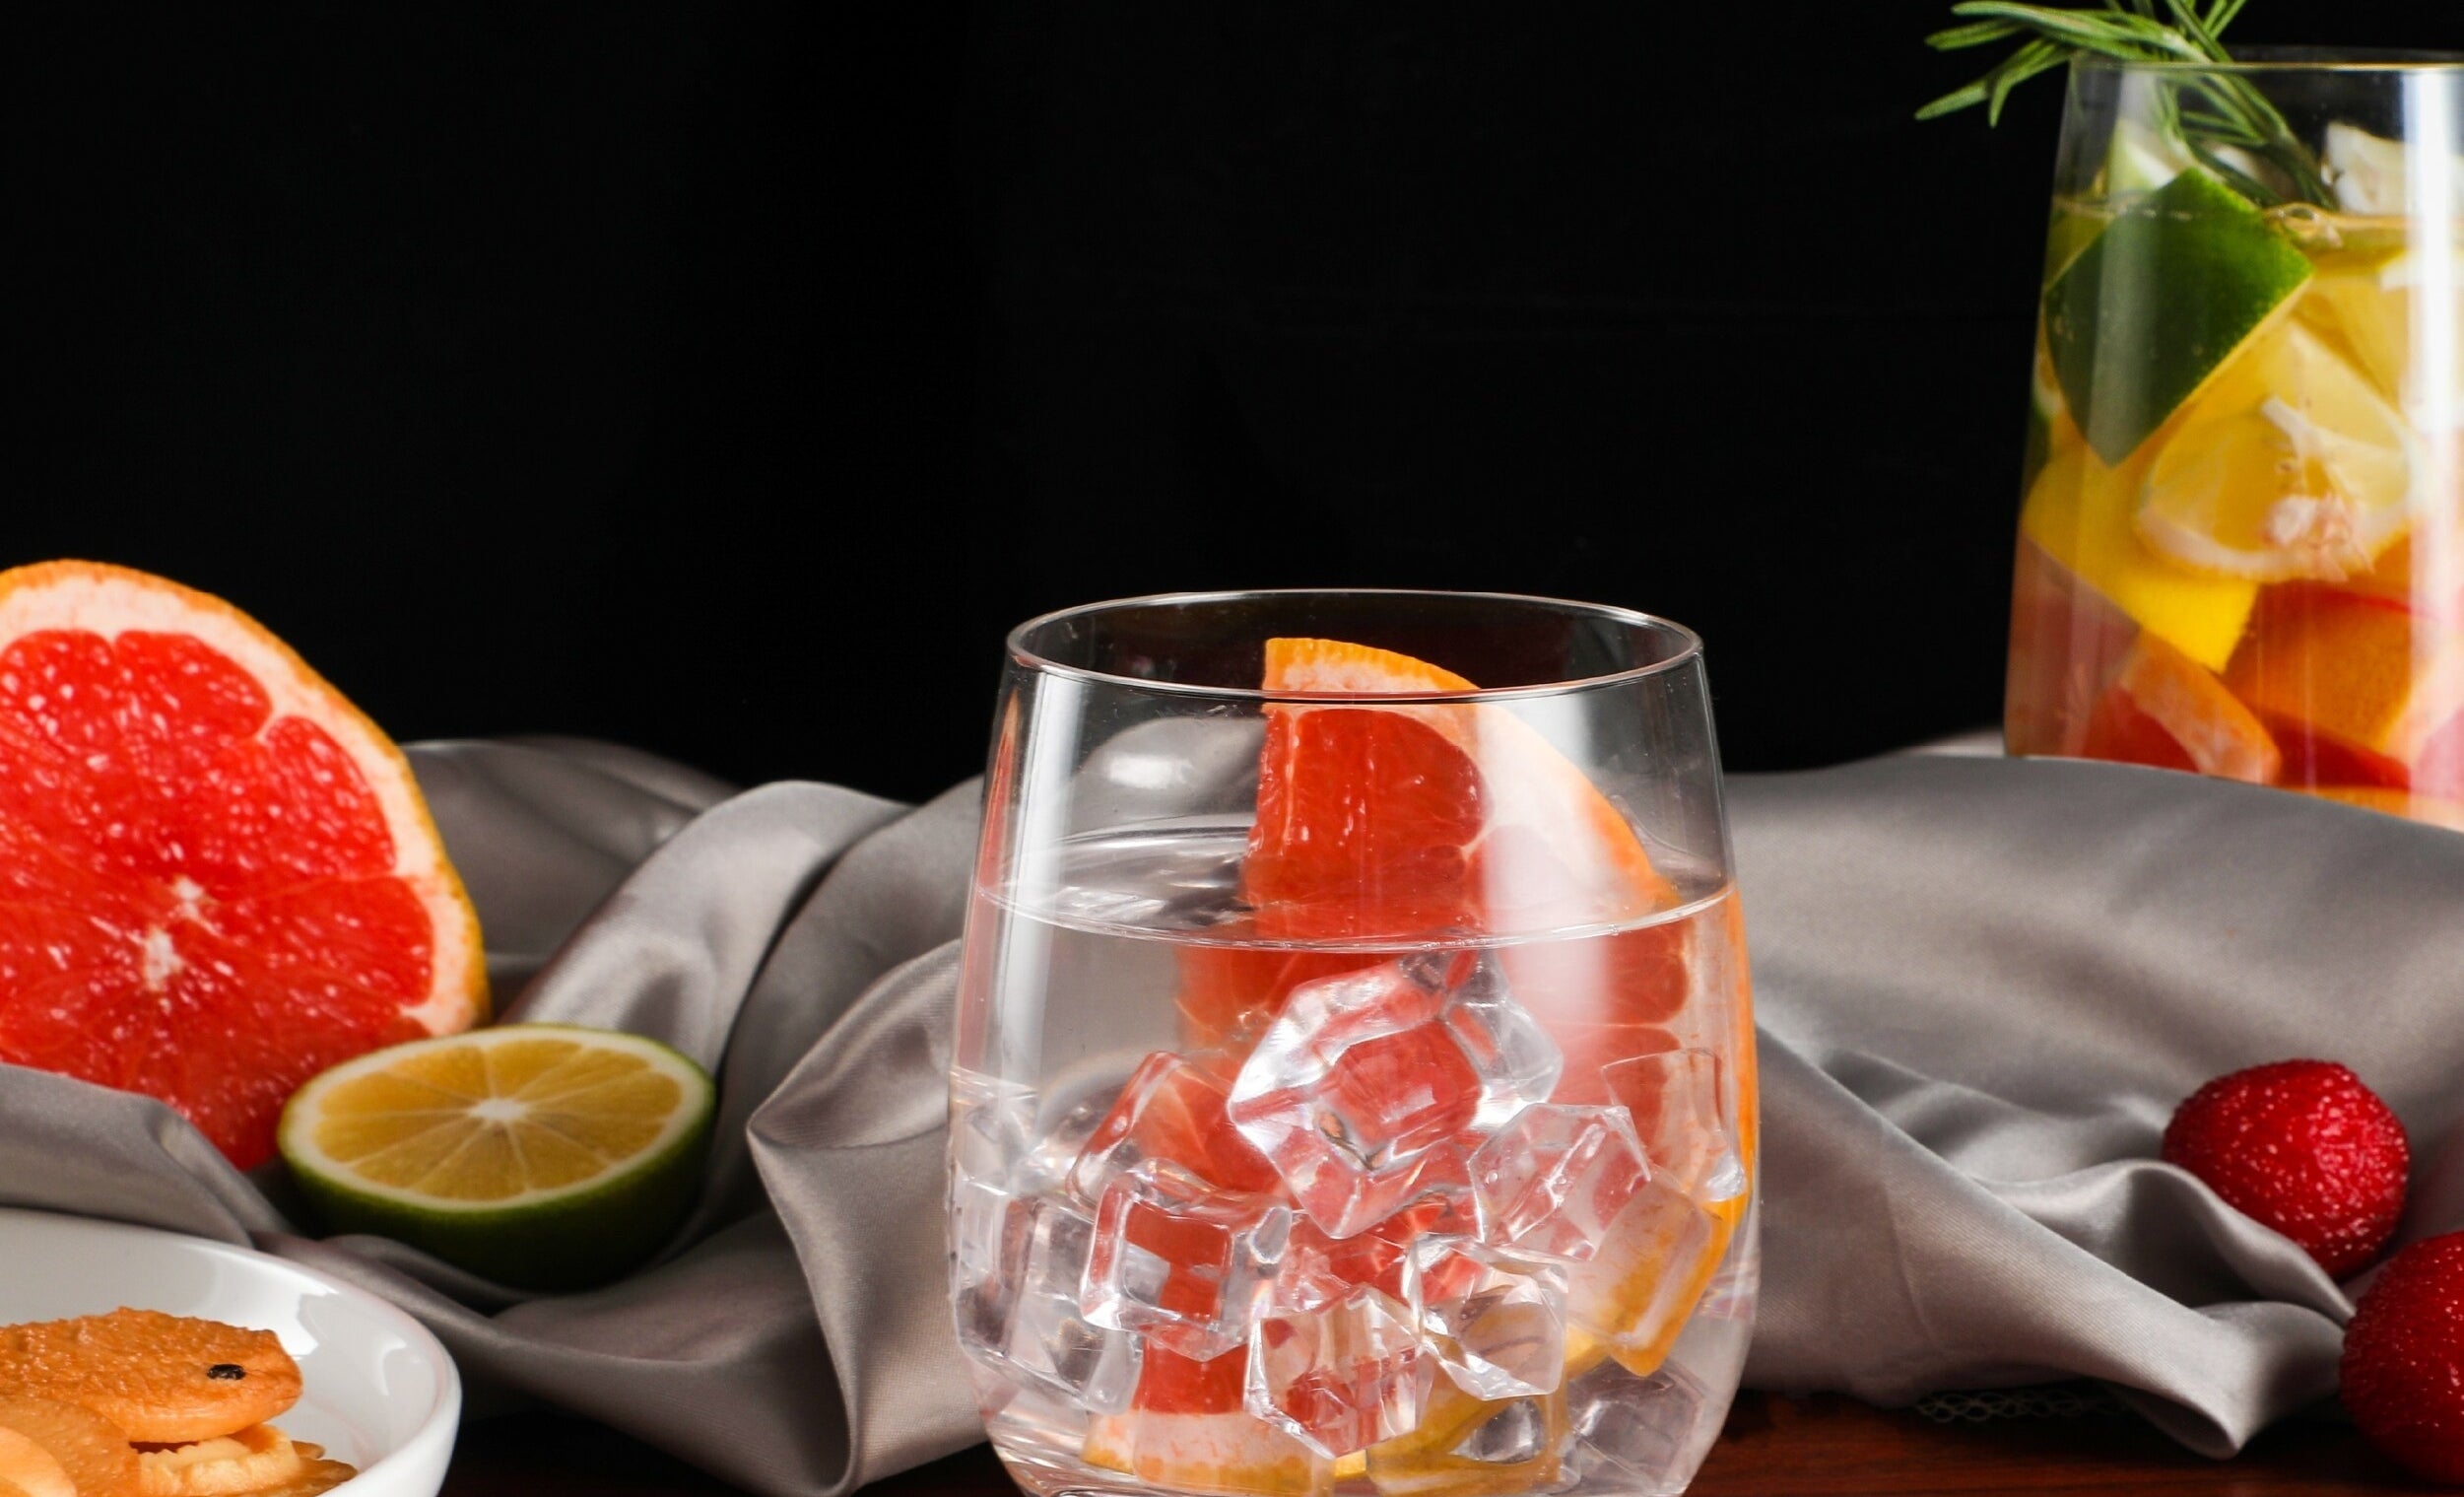 one of the glasses with ice water and a grapefruit slice in it